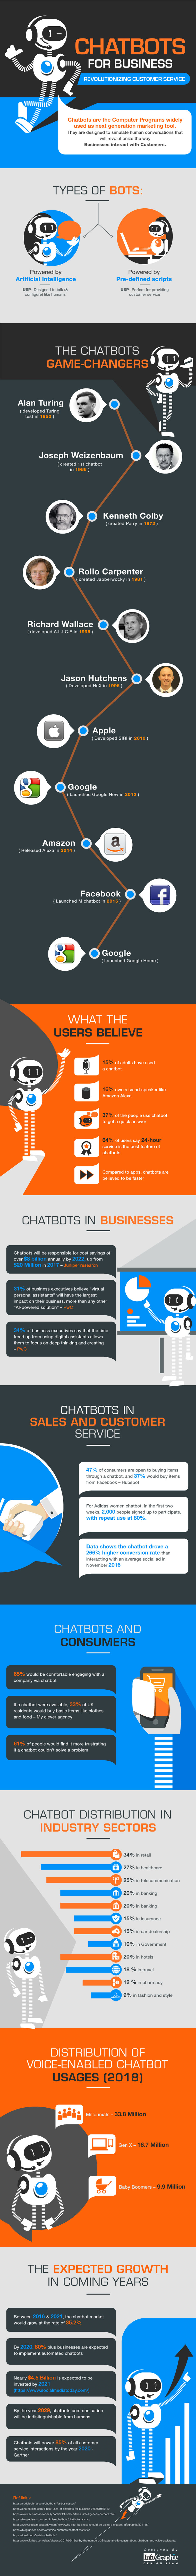 Chatbots For Business 